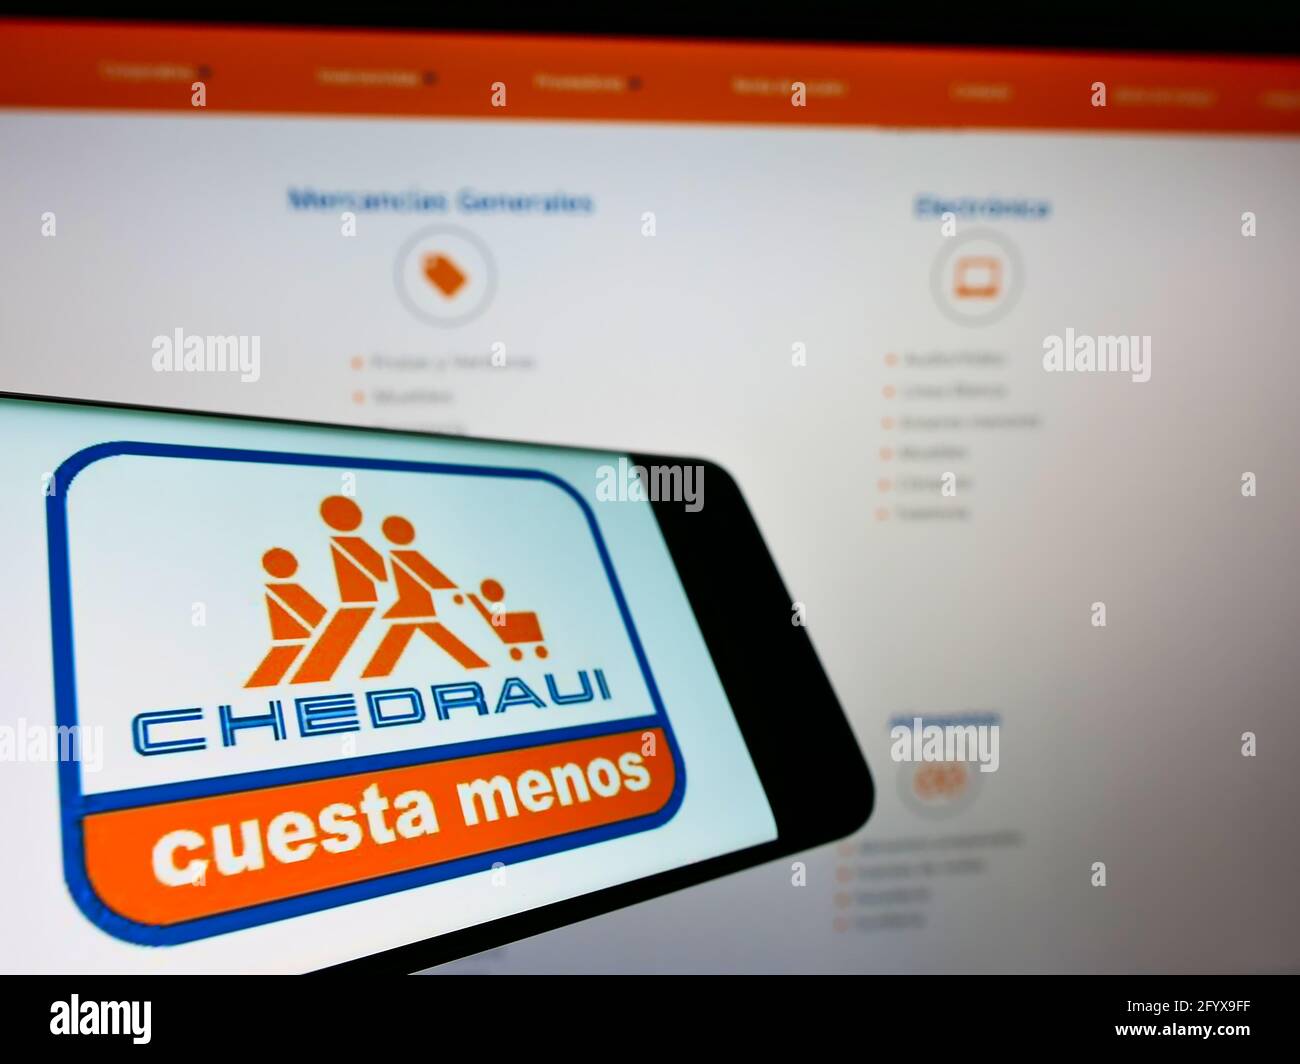 Smartphone with business logo of Mexican Grupo Comercial Chedraui S.A.B. de C.V. on screen in front of website. Focus on center of phone display. Stock Photo